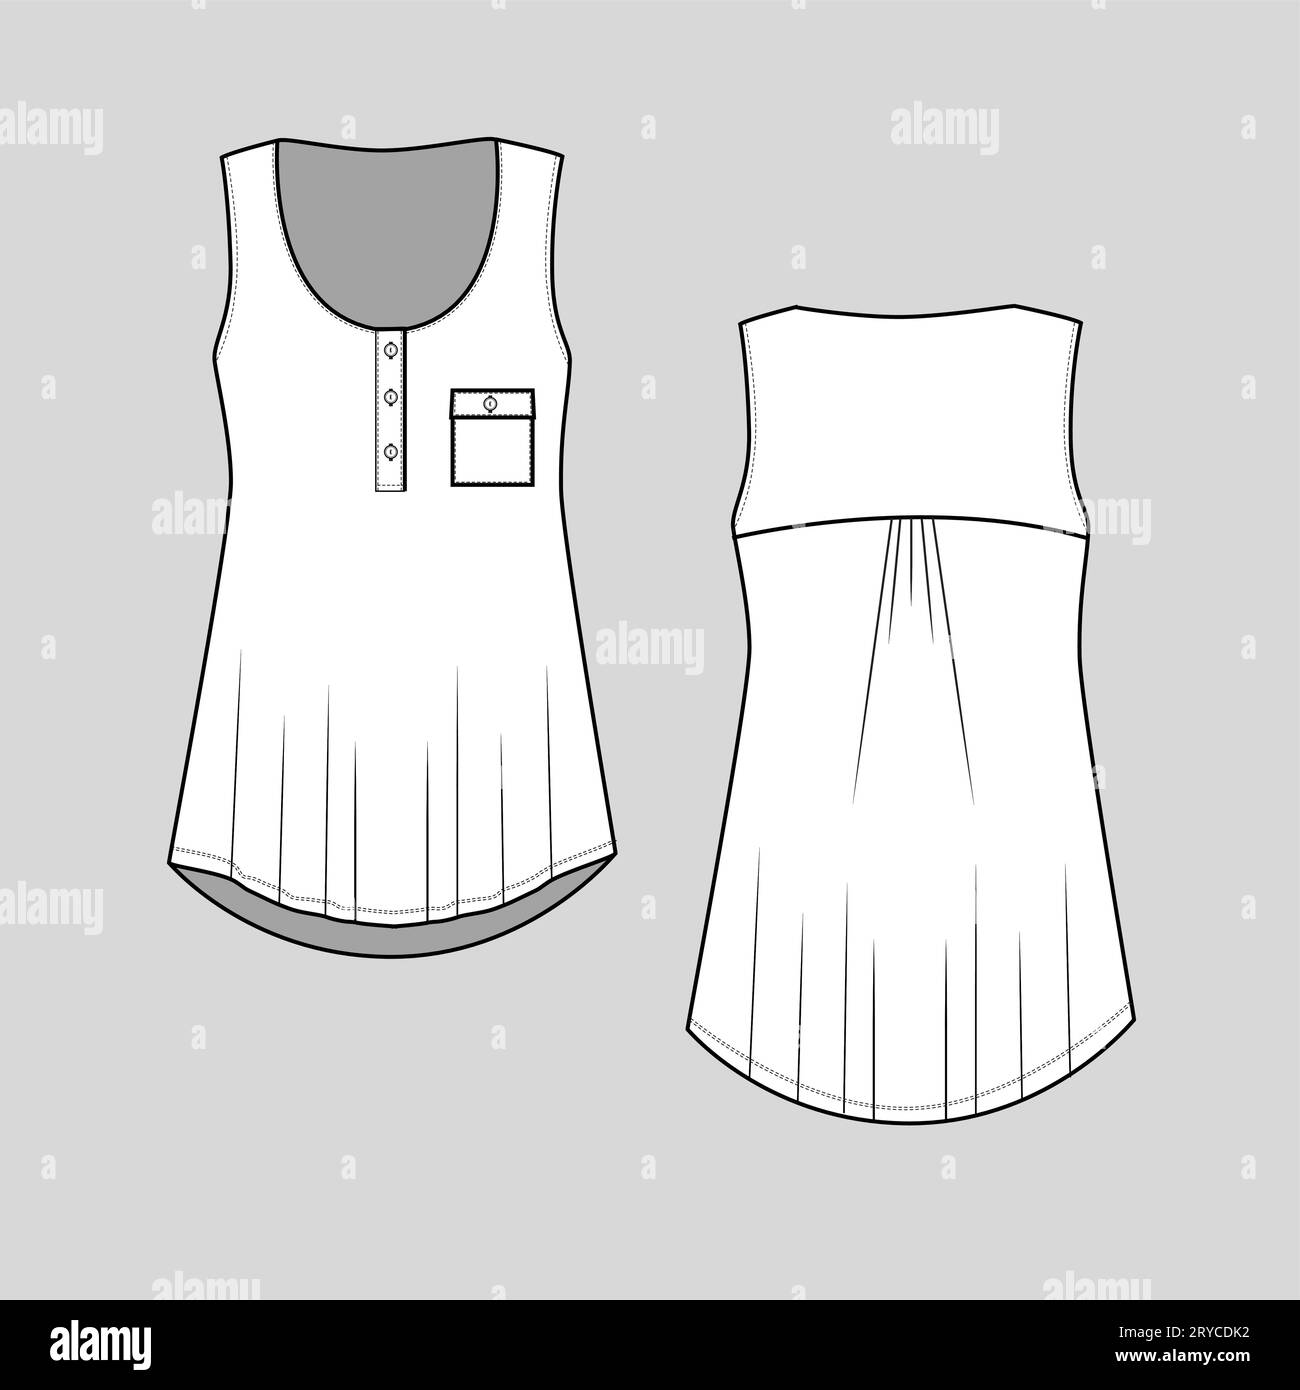 Women sleeveless blouse with placket and pocket t shirt top button panel back pleats gathering dip hem Fashion Flat sketch technical drawing template Stock Vector